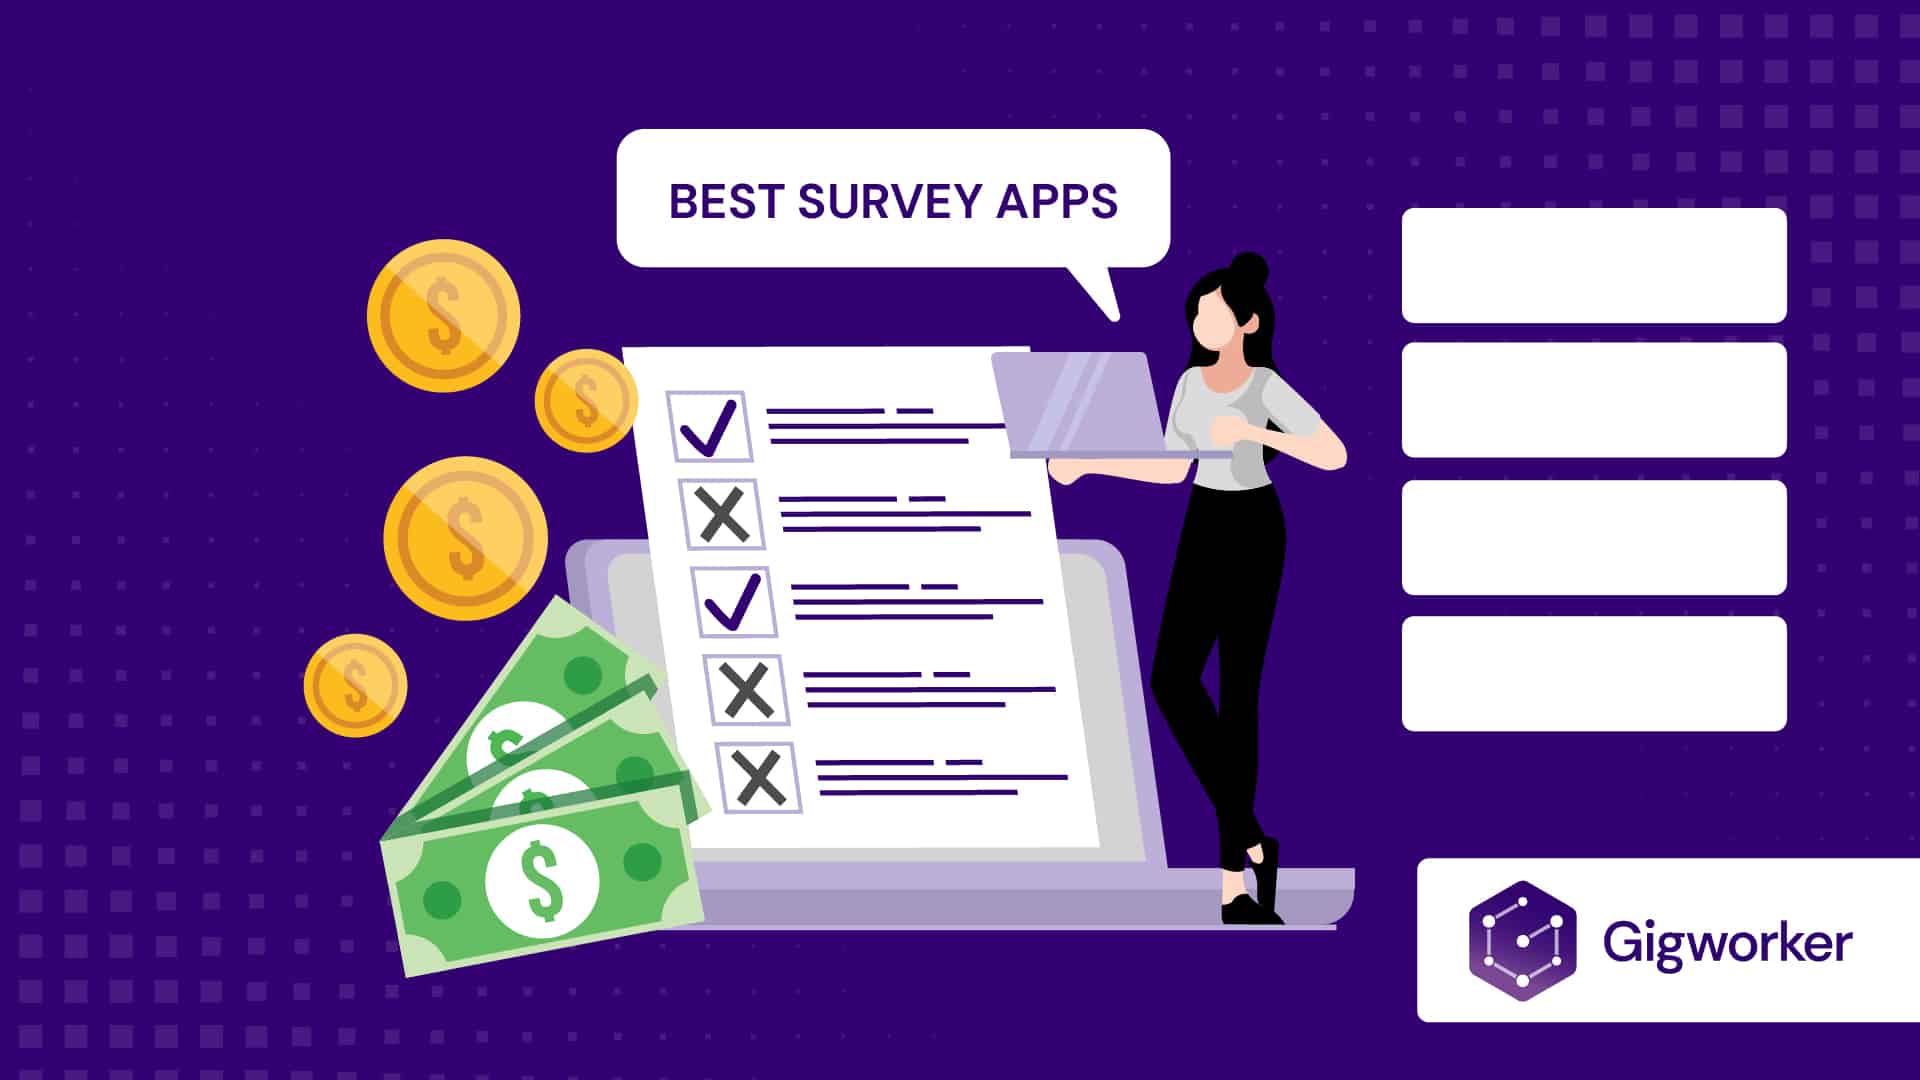 vector graphic showing an illustration of a lady seraching best survey apps on a laptop